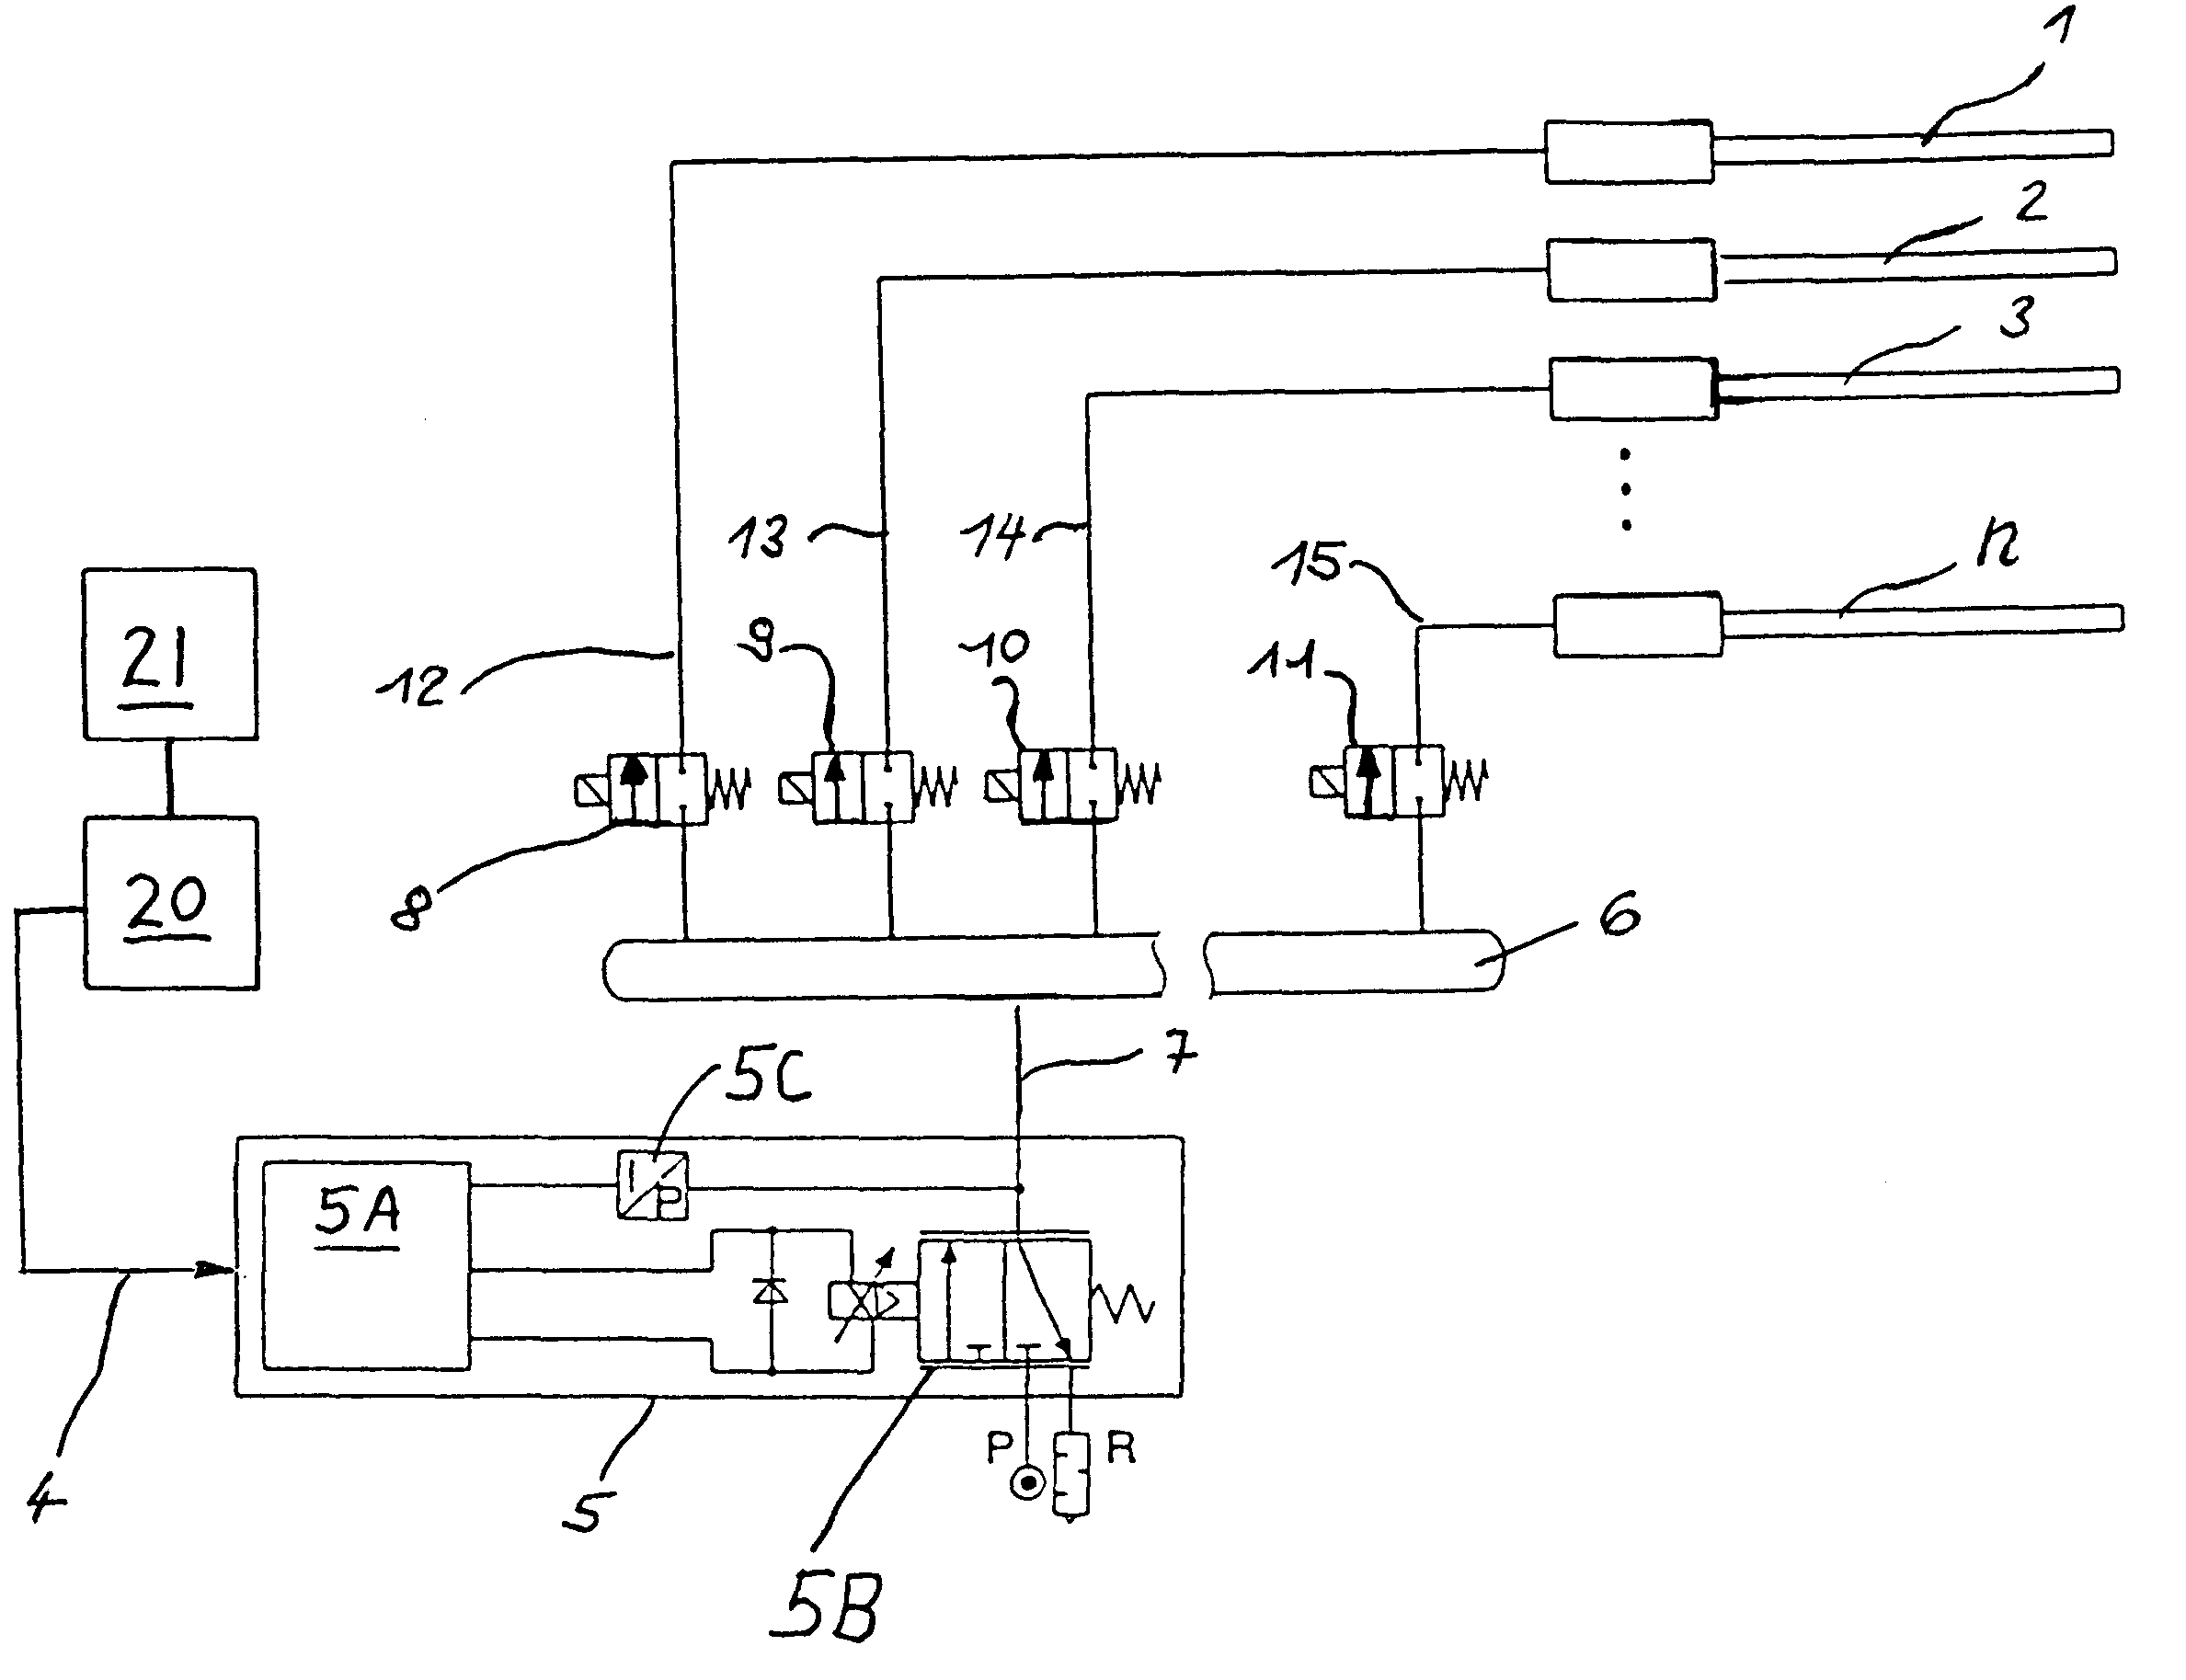 Air supply controller for weft insertion nozzles in an air jet loom